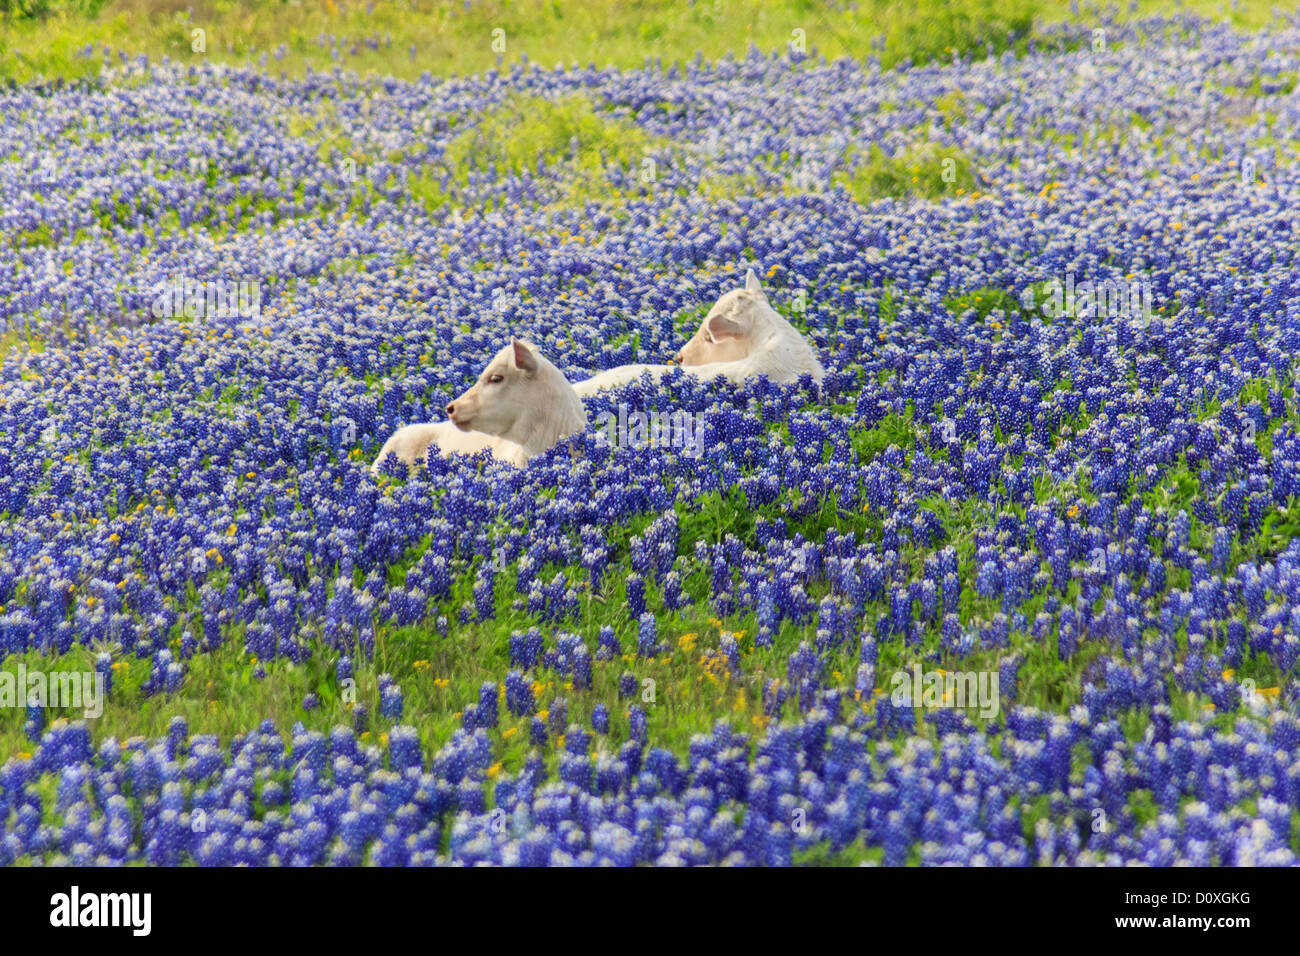 Ennis, Lupinus texensis, Texas, USA, biennial plant, bluebonnets field, spring, plants, cows, agriculture, Stock Photo